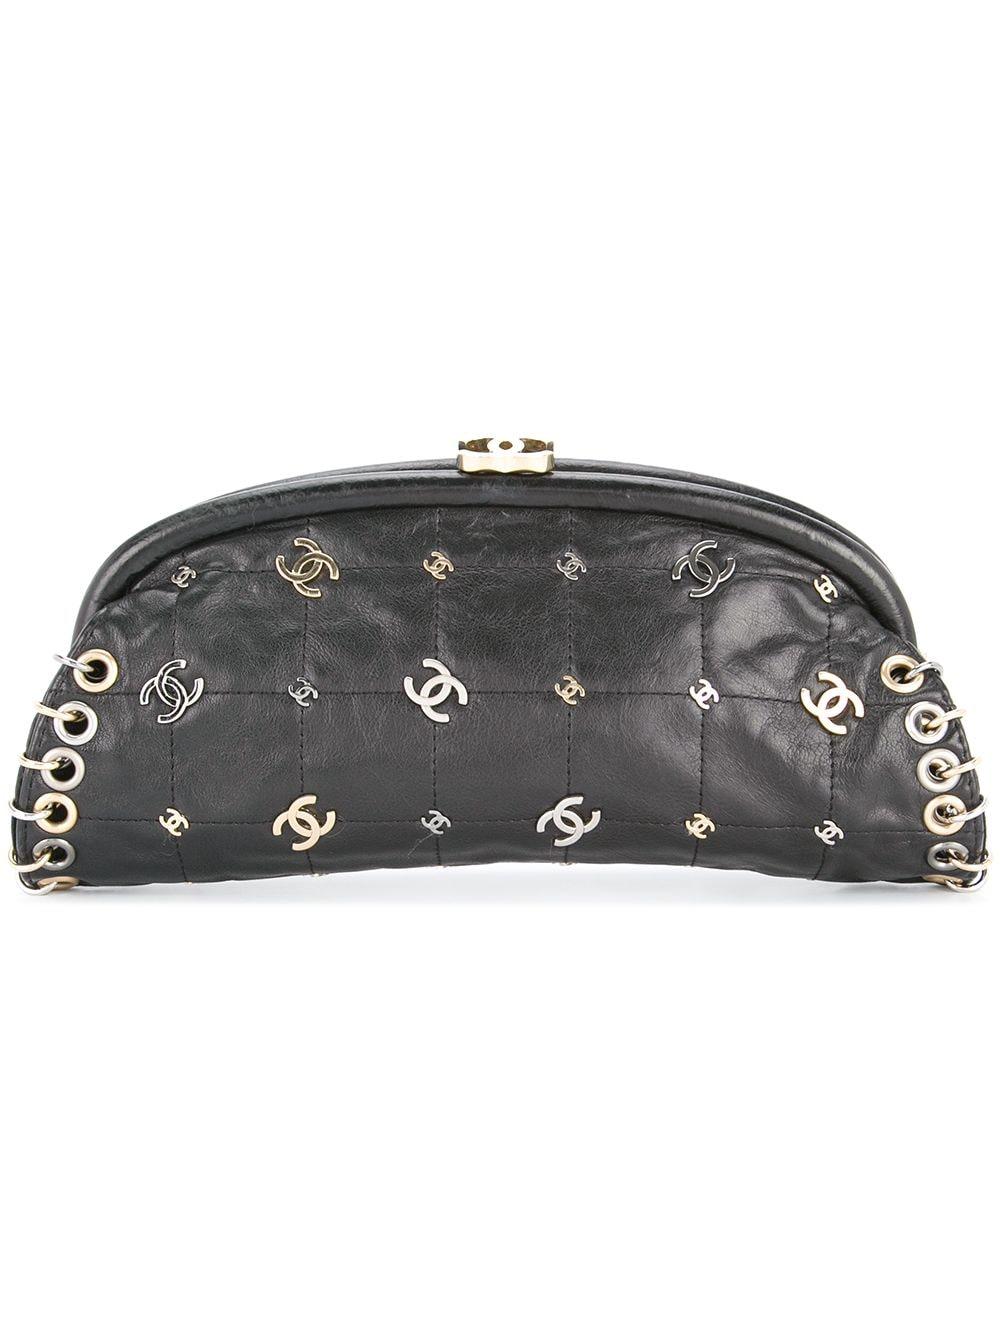 Chanel Spring 2007 Limited Edition Charm Rare Black Leather Clutch For Sale 5